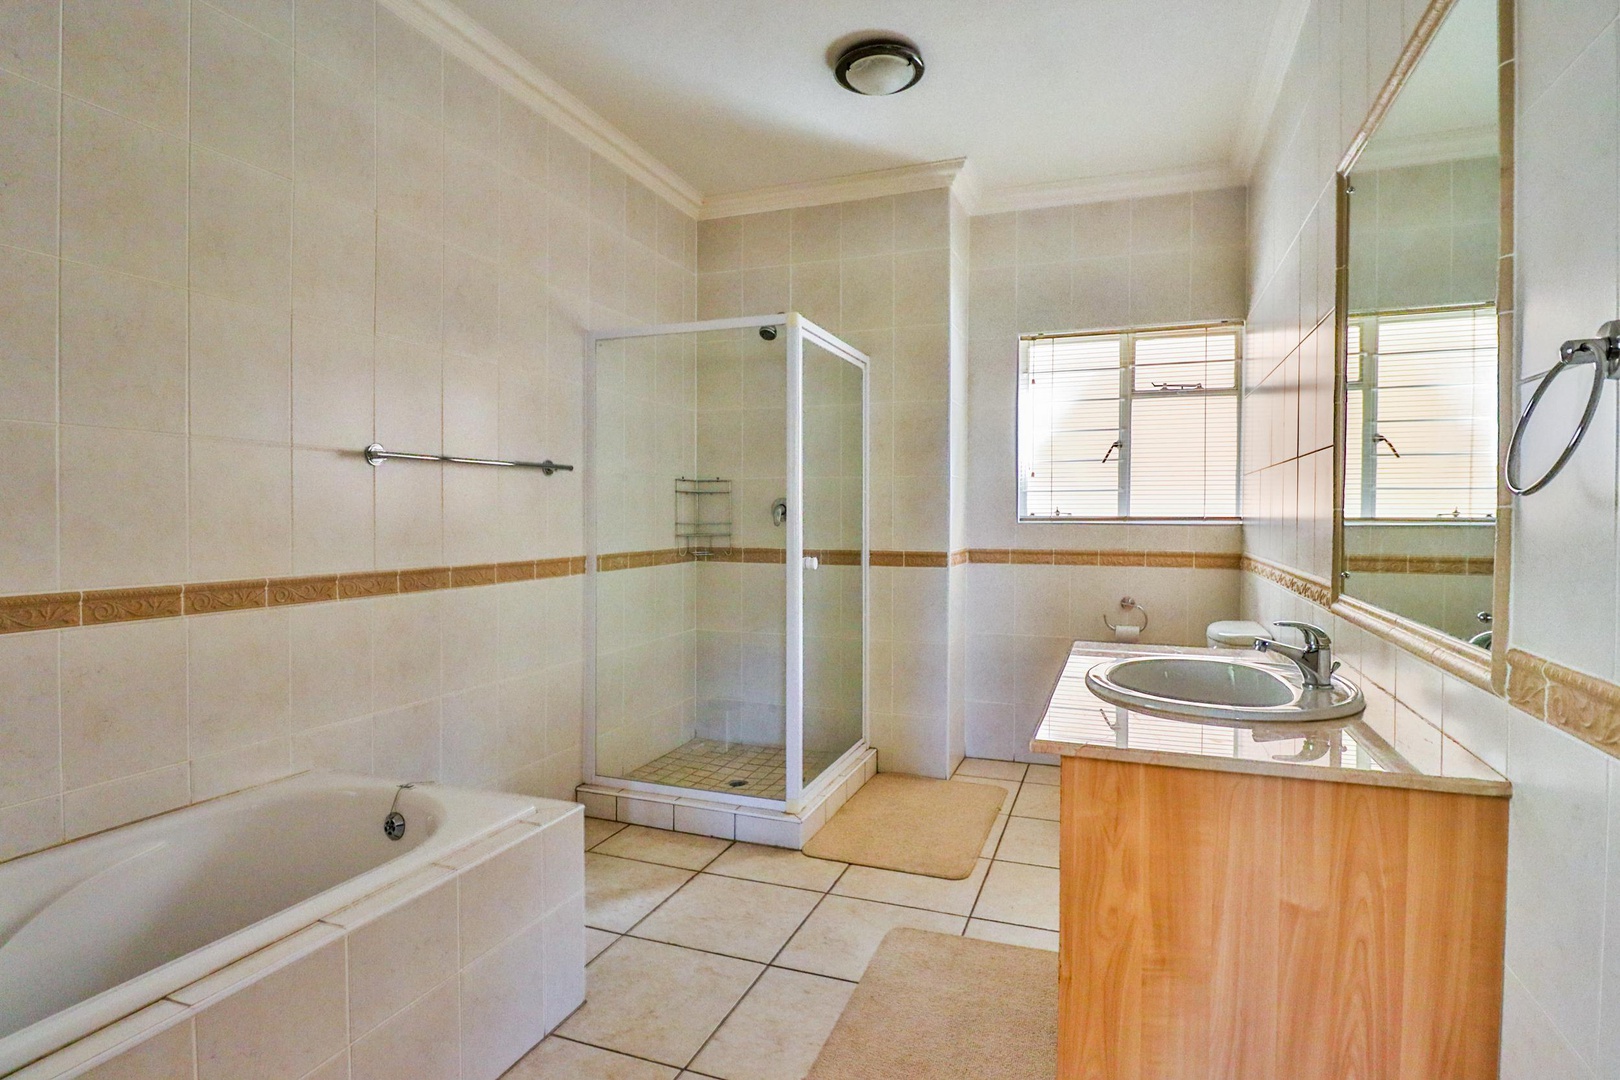 House in Kosmos - En-suite bathroom - spacious, with both bath and shower